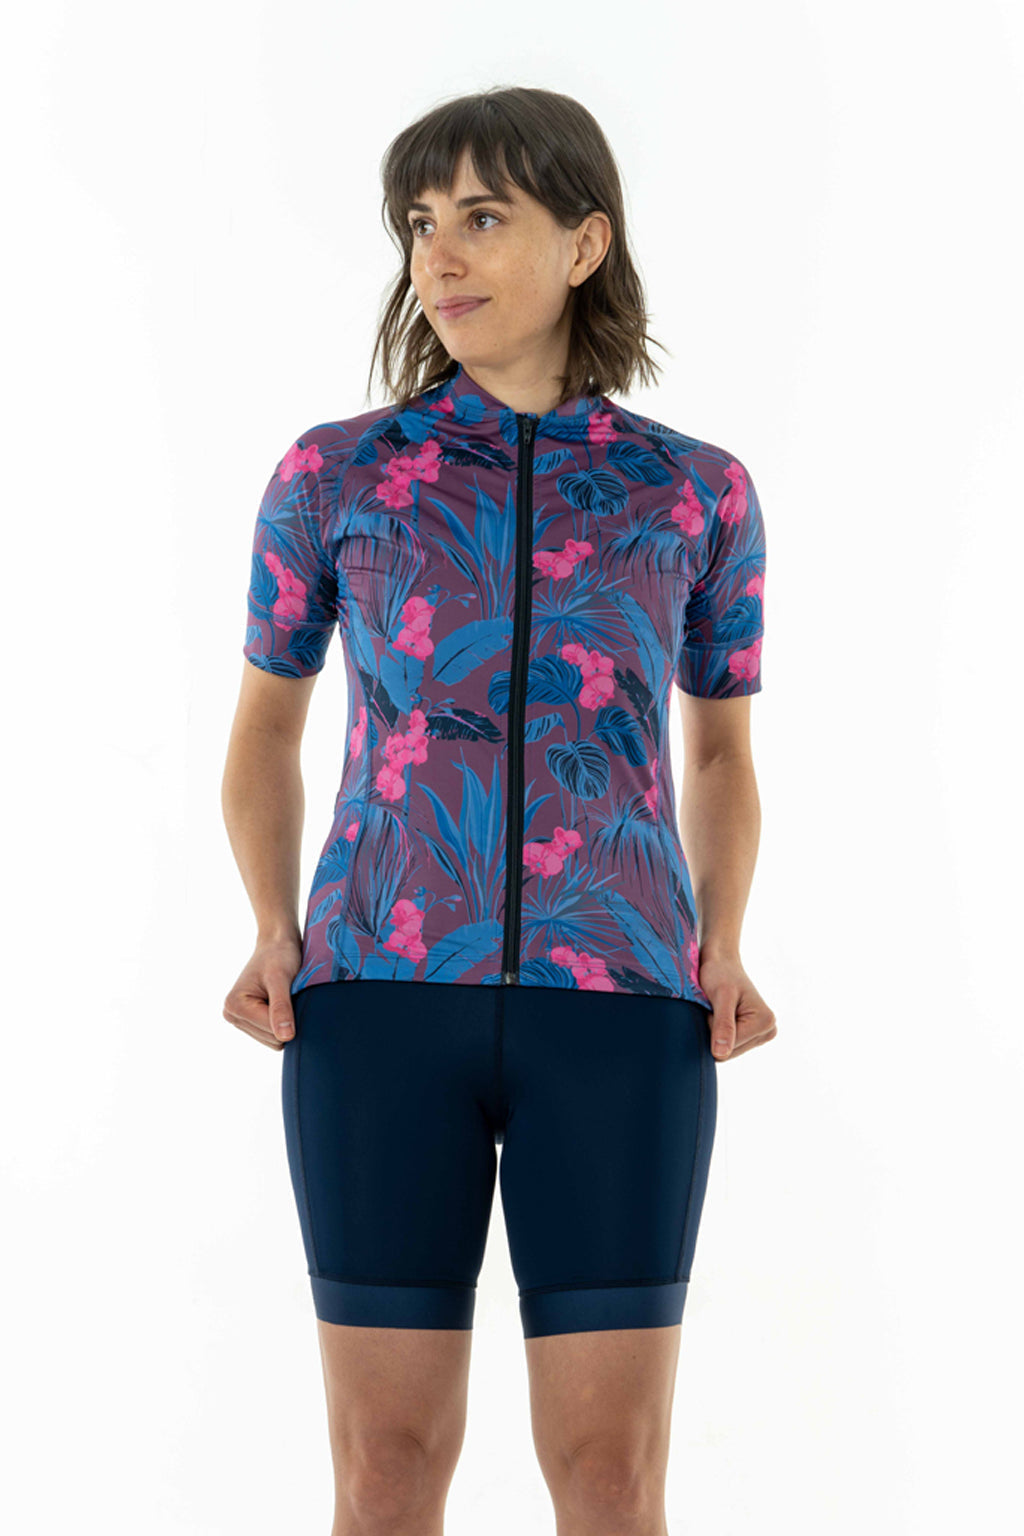 Women's Cycling Jersey - Breathable, Wicking, Tropical Rose